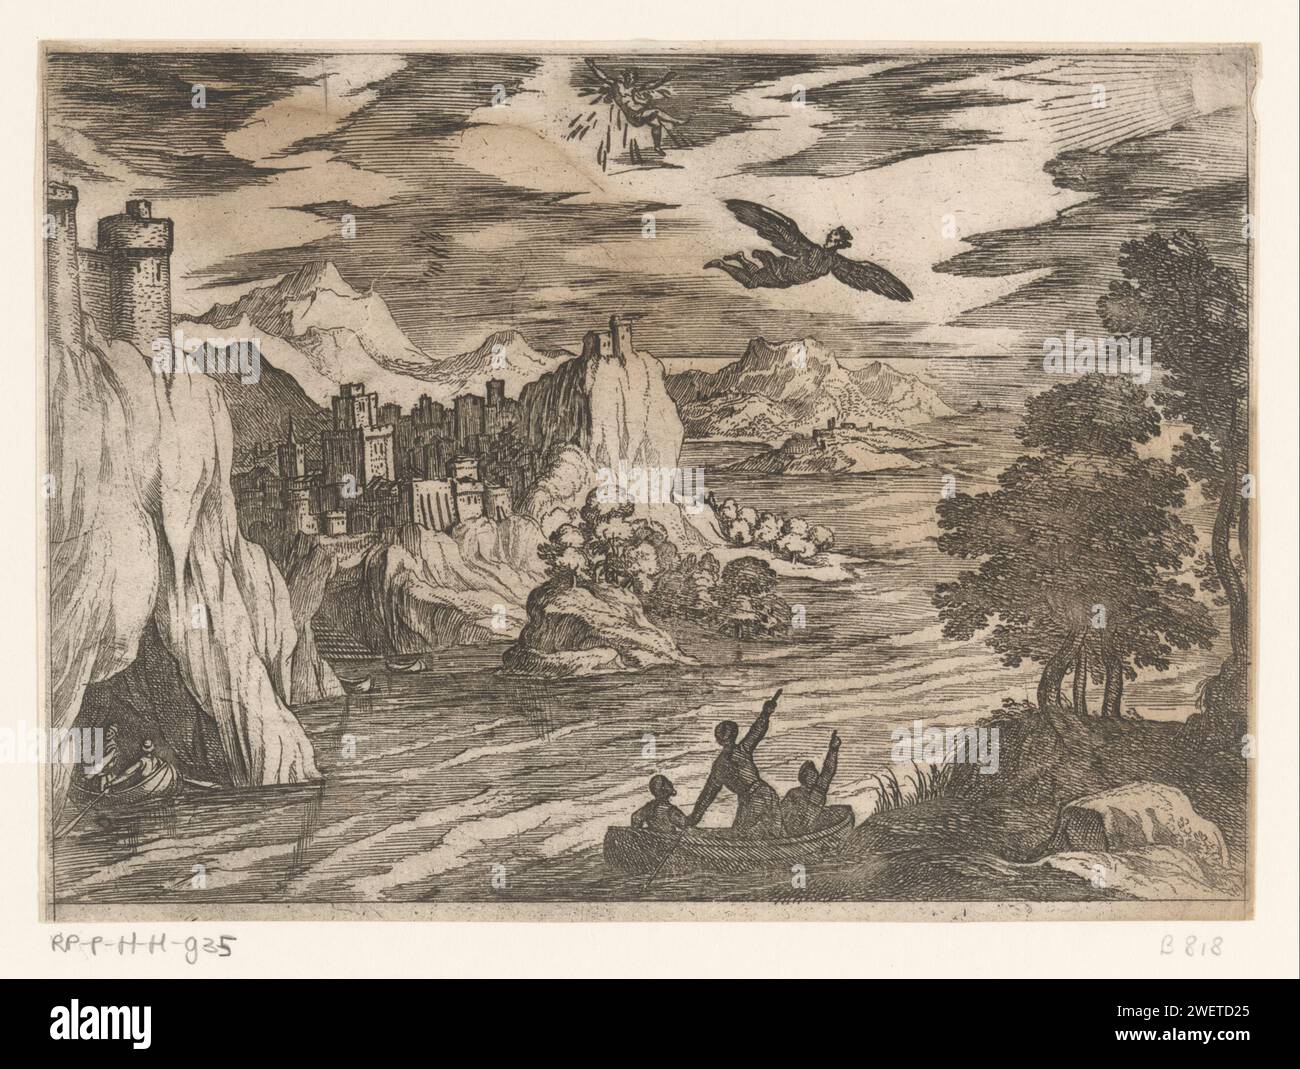 Landscape with the fall of Icarus, Antonio Tempesta, 1565 - 1630 print Landscape with sea and rocks and the falling Icarus and the floating Daedalus. Icarus flew too close to the sun, so that the wax melted with which its wings were attached.  paper etching death i.e. the fall of Icarus (Daedalus present). landscapes - HH - ideal landscapes Stock Photo